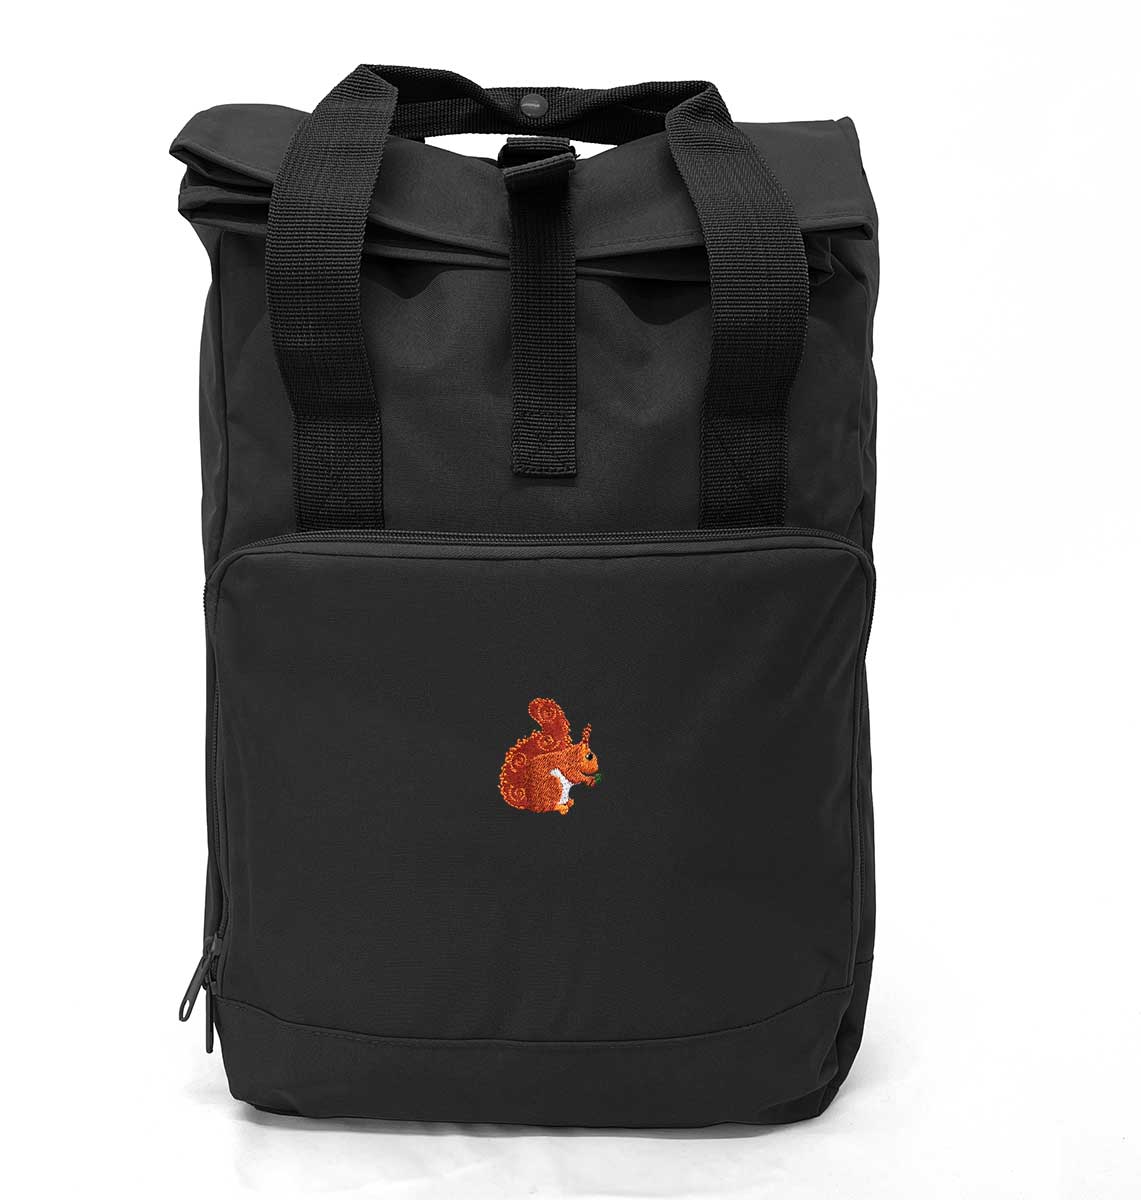 Red Squirrel Large Roll-top Laptop Recycled Backpack - Blue Panda